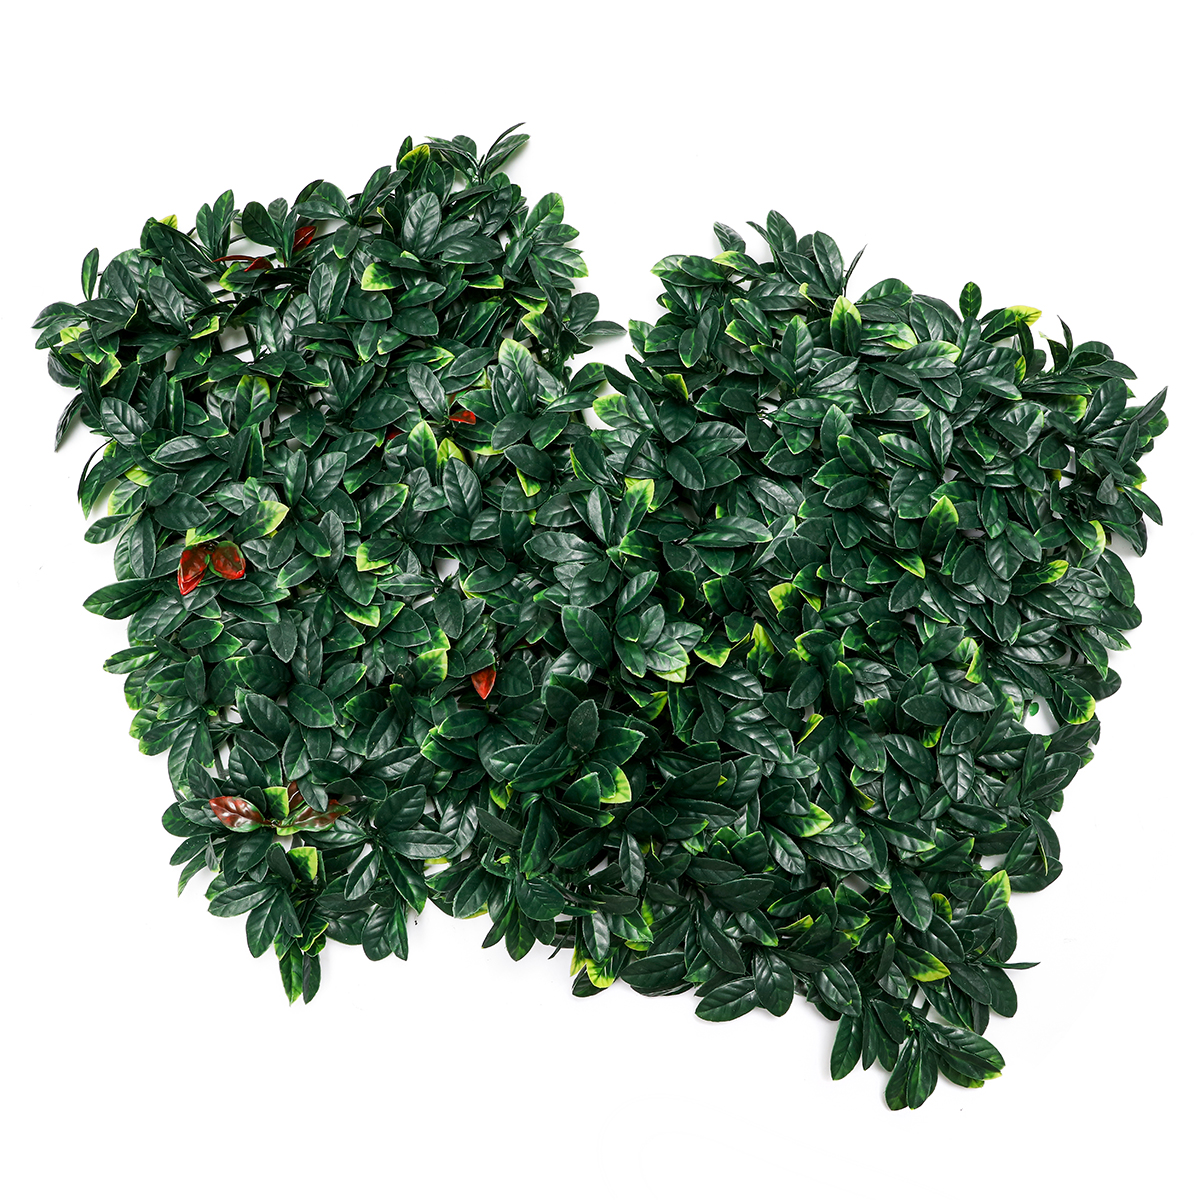 4060CM-Artificial-Topiary-Hedges-Panels-Plastic-Faux-Shrubs-Fence-Mat-Greenery-Wall-Backdrop-Decor-G-1729461-10